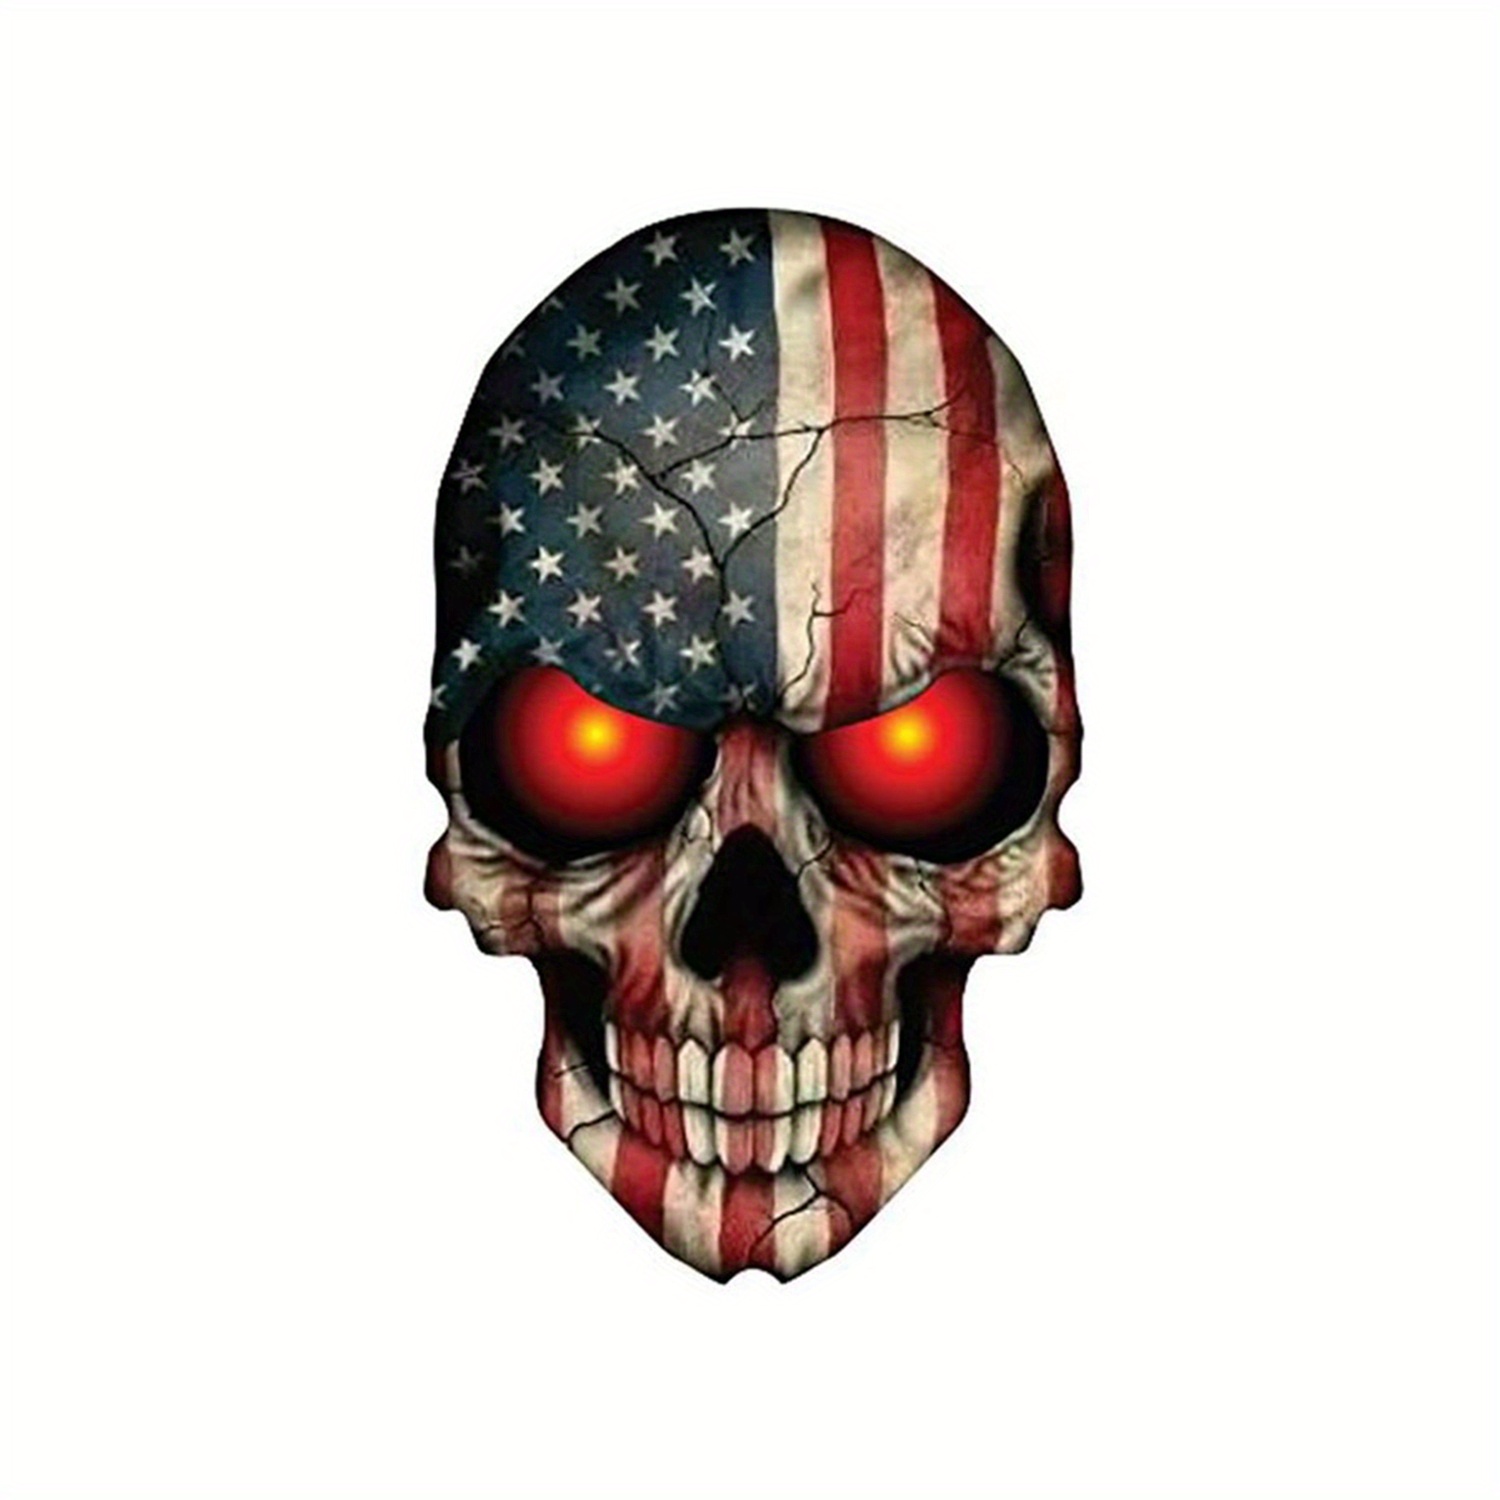 Motorcycle Helmet Stickers 100% Vinyl Stickers for Adults Badass Motorcycle  Decals Including Skulls, American Flag 